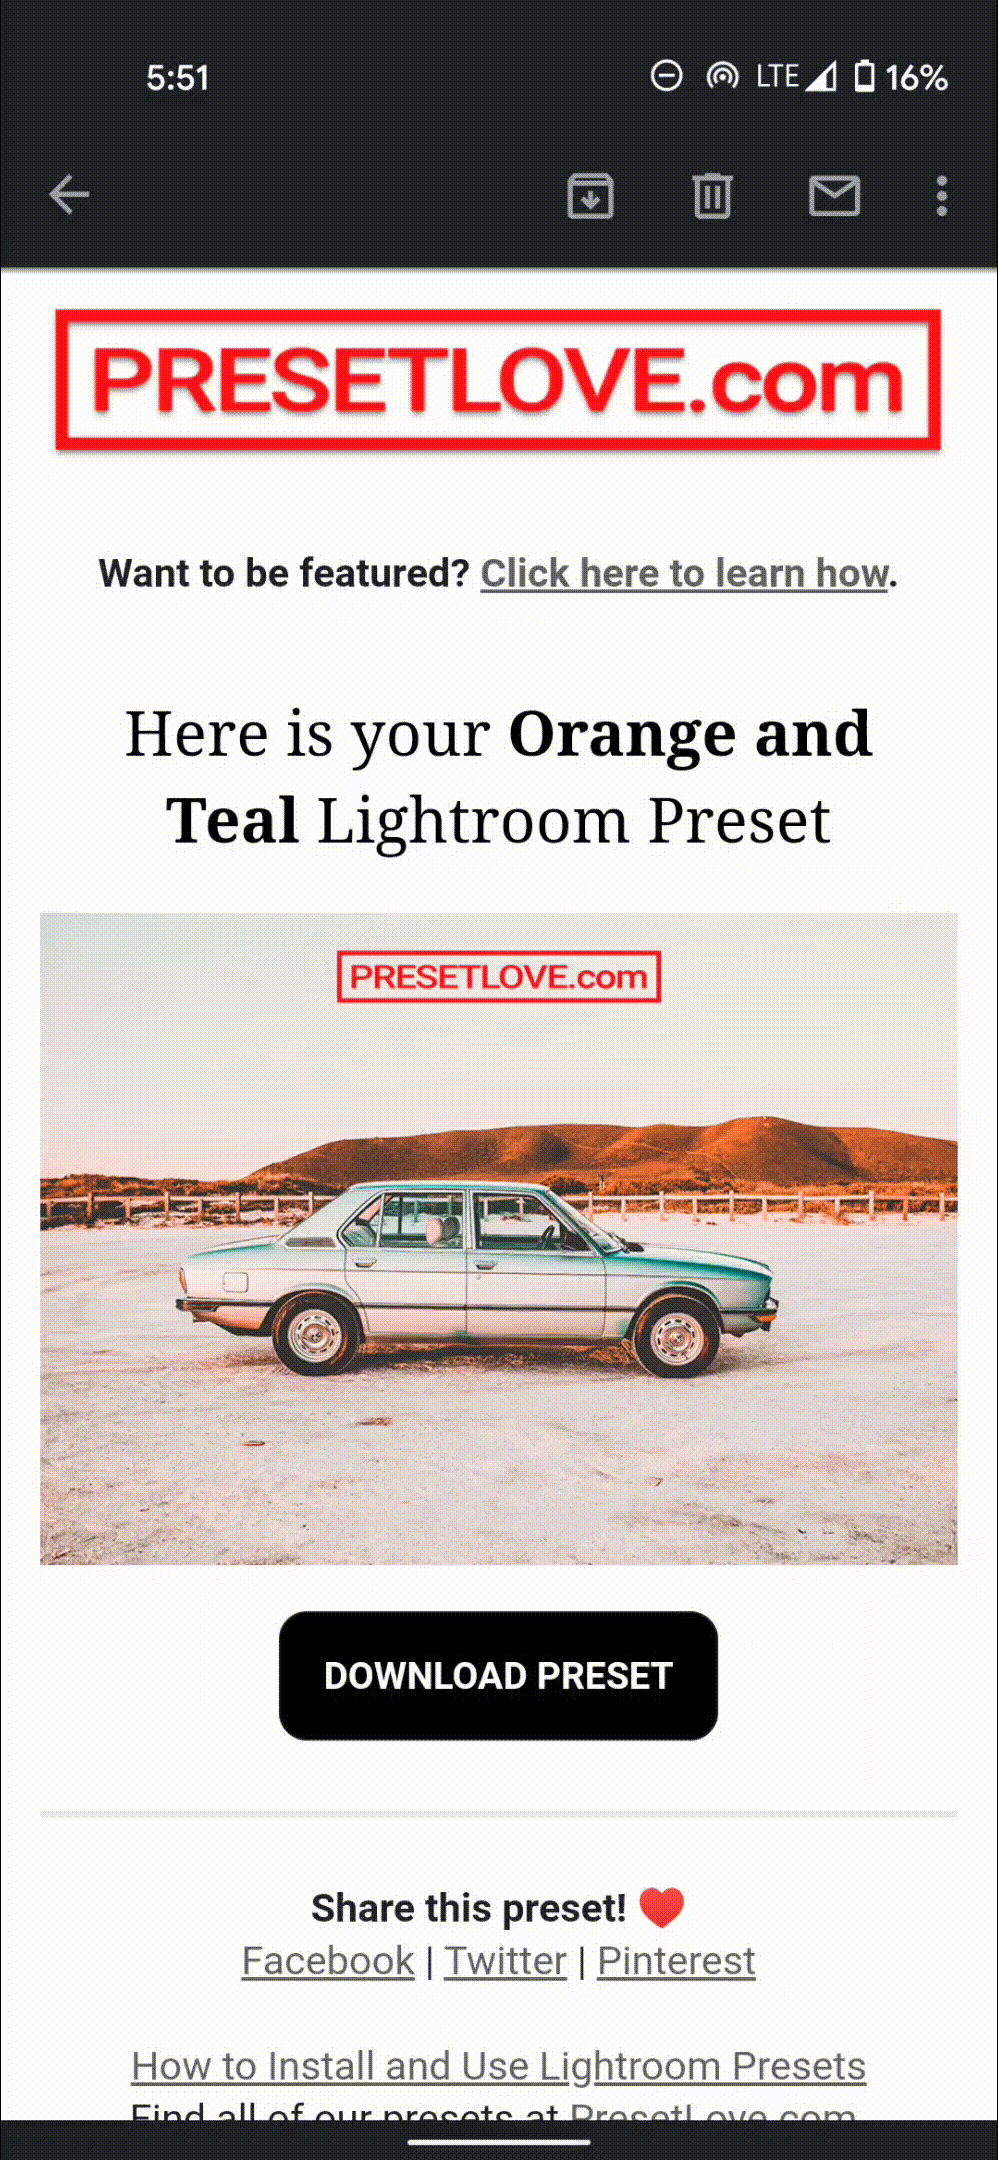 Open your email and download the Lightroom preset.